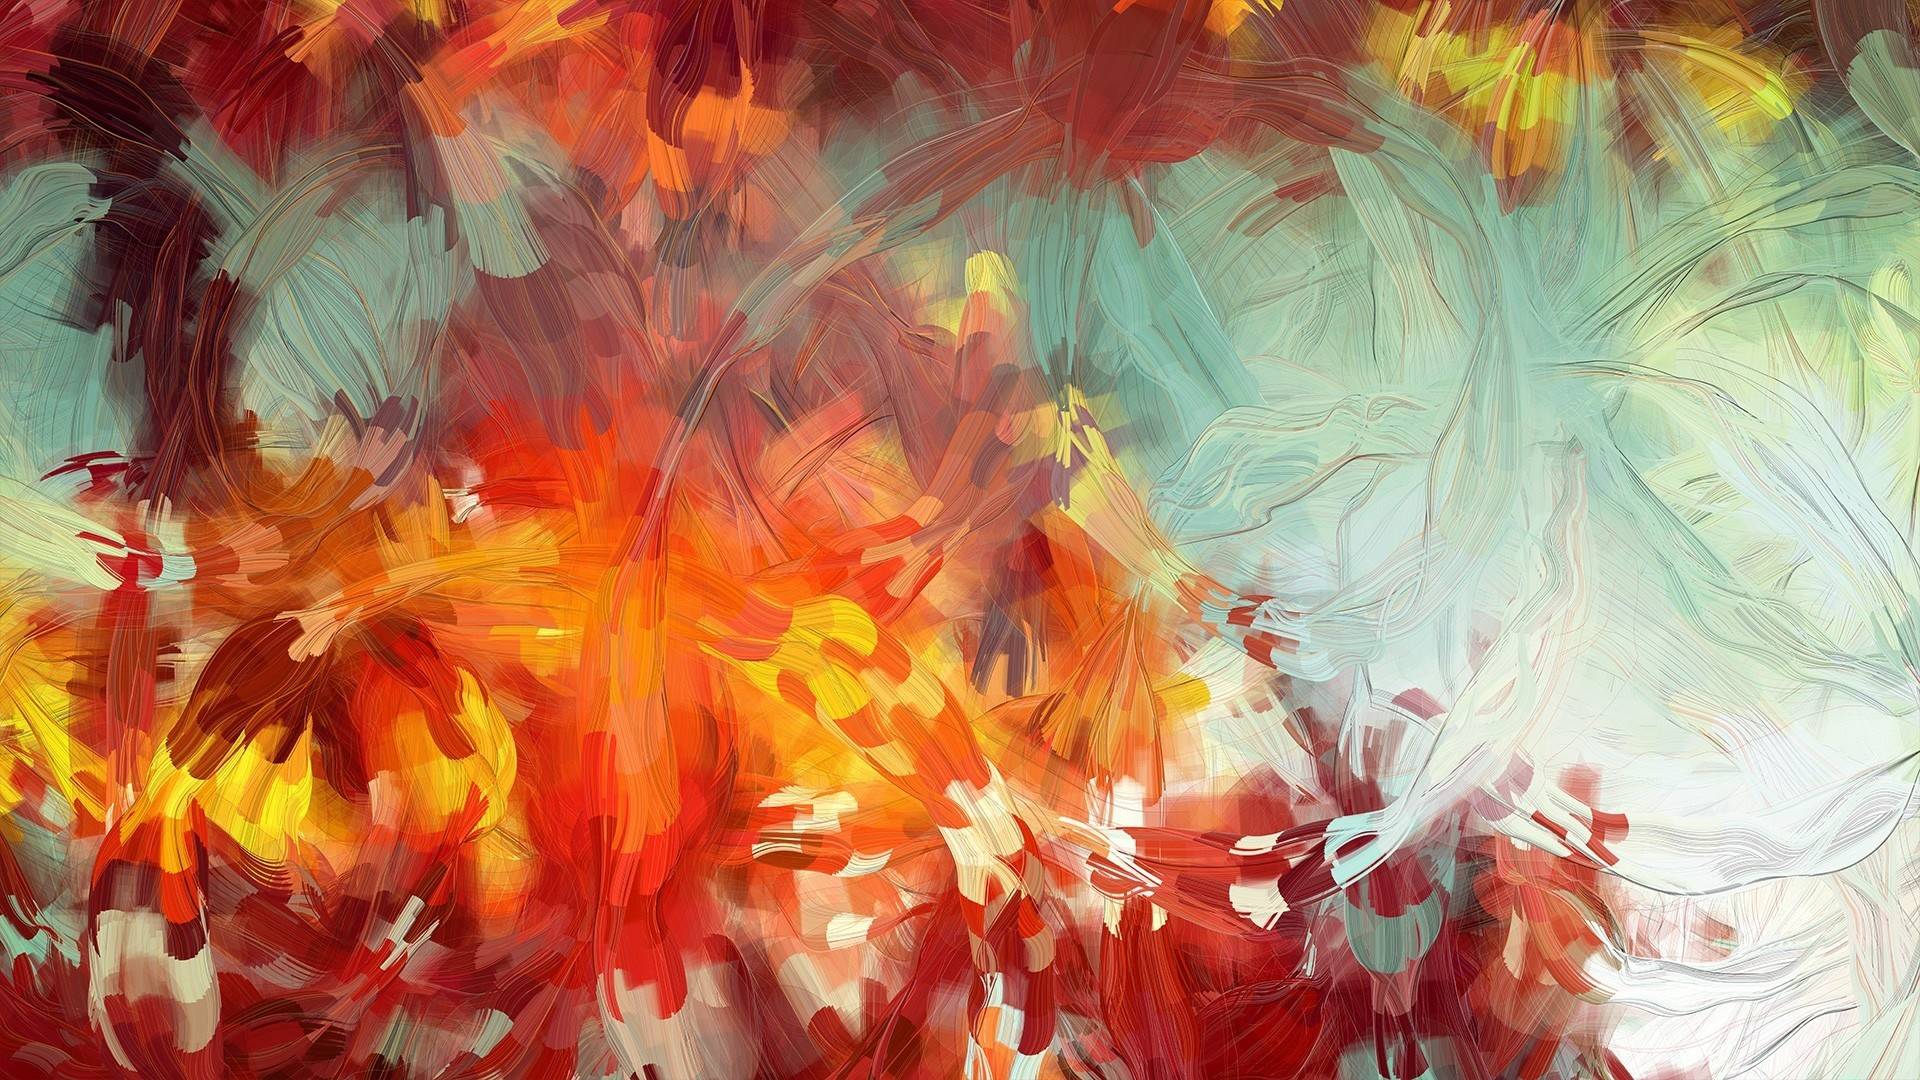 Abstract Paintings 19201080 Wallpaper 2174723